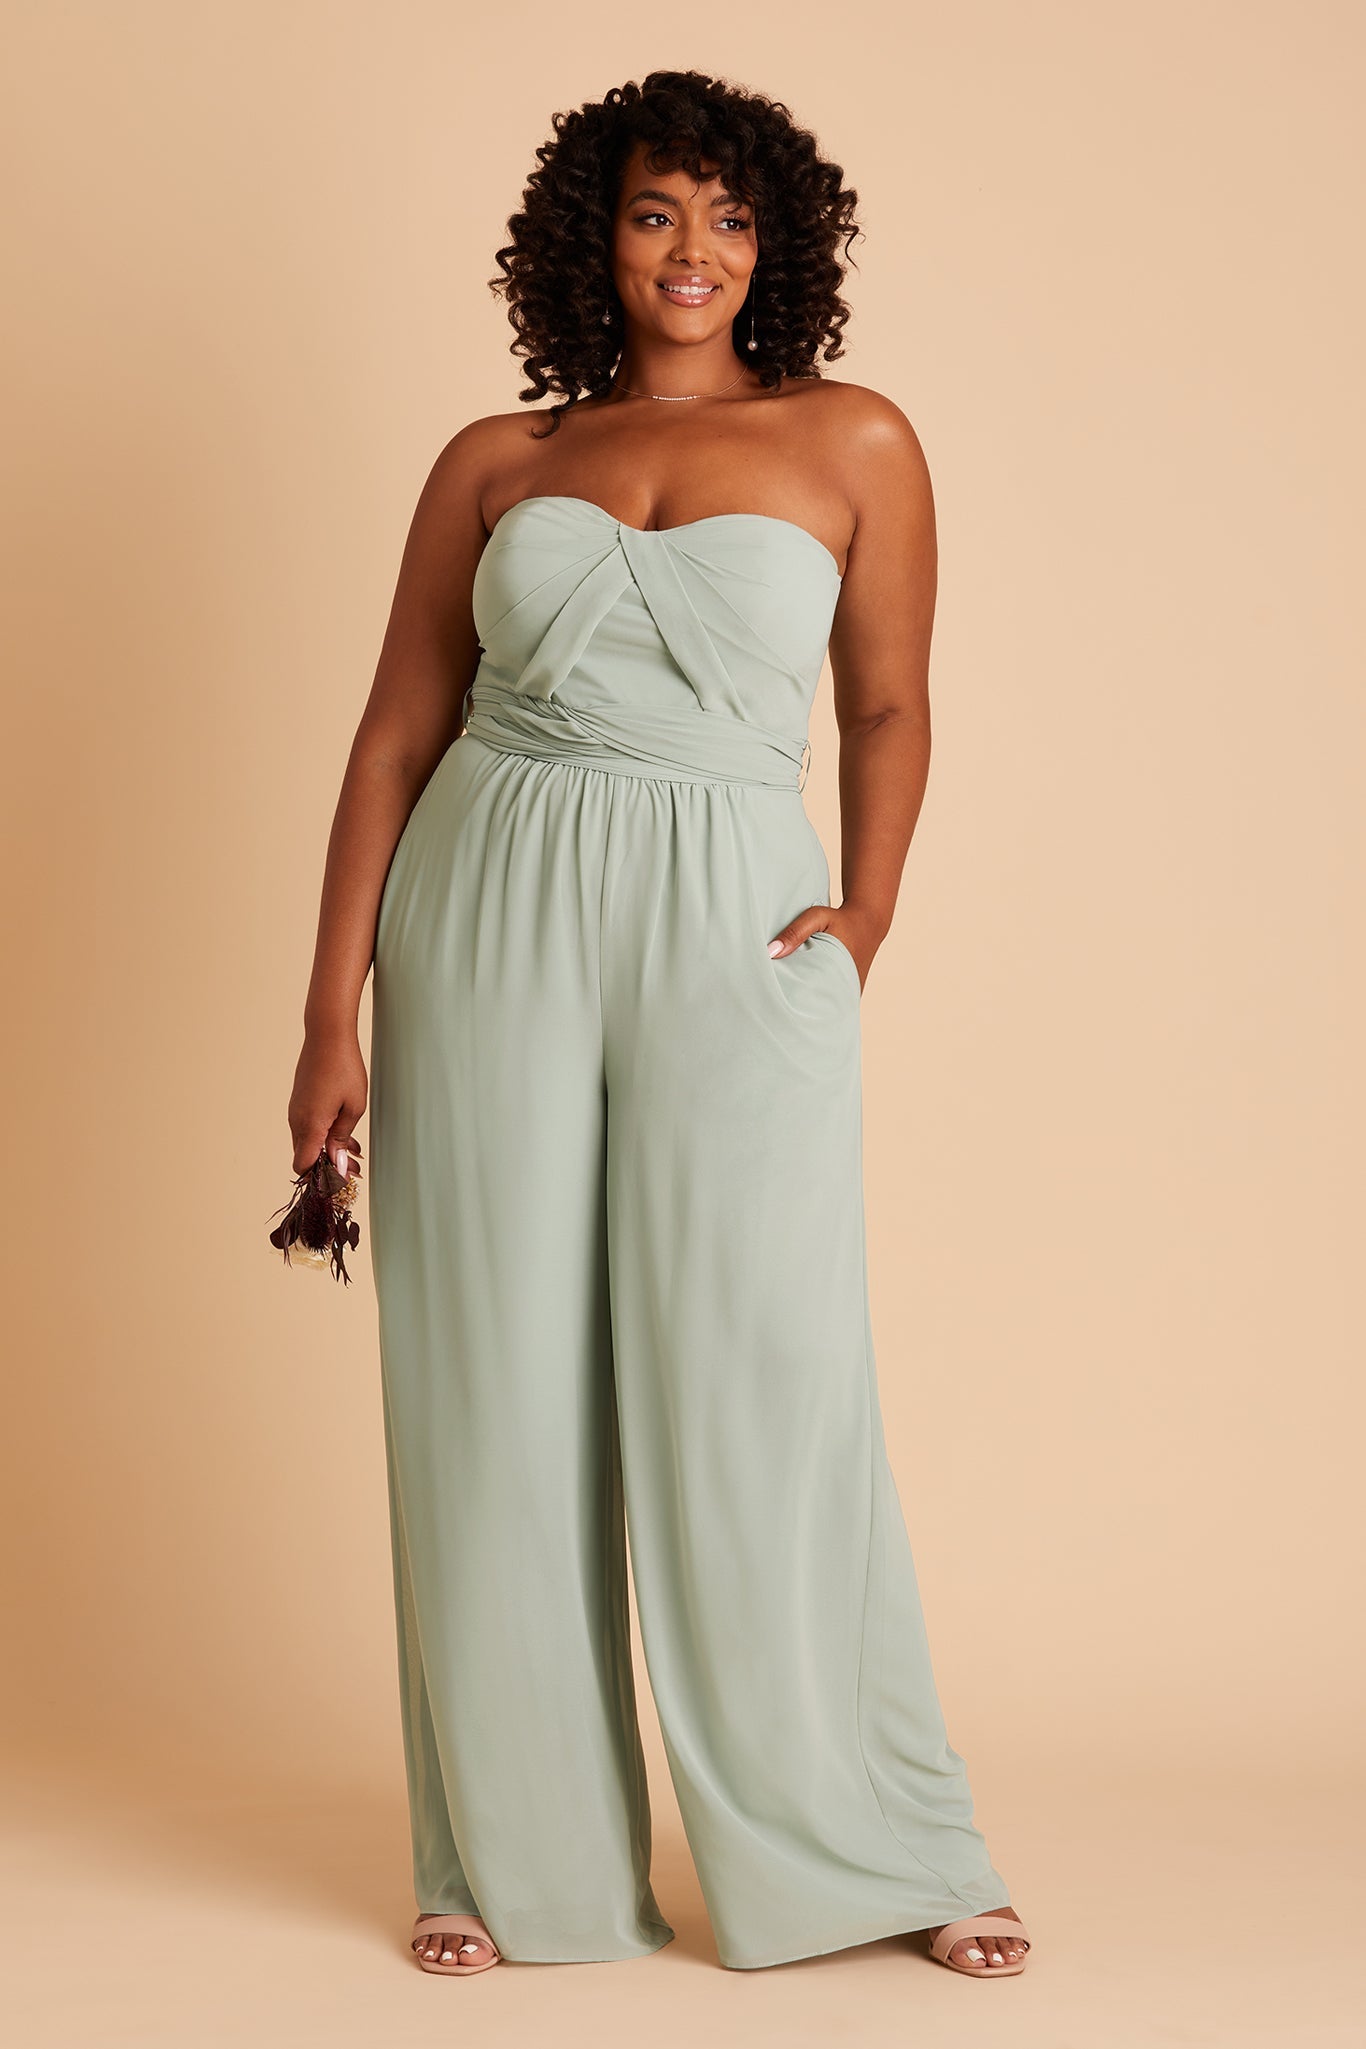 White Bridal Jumpsuits For Every Wedding Or Pre-Wedding Event -   Fashion Blog